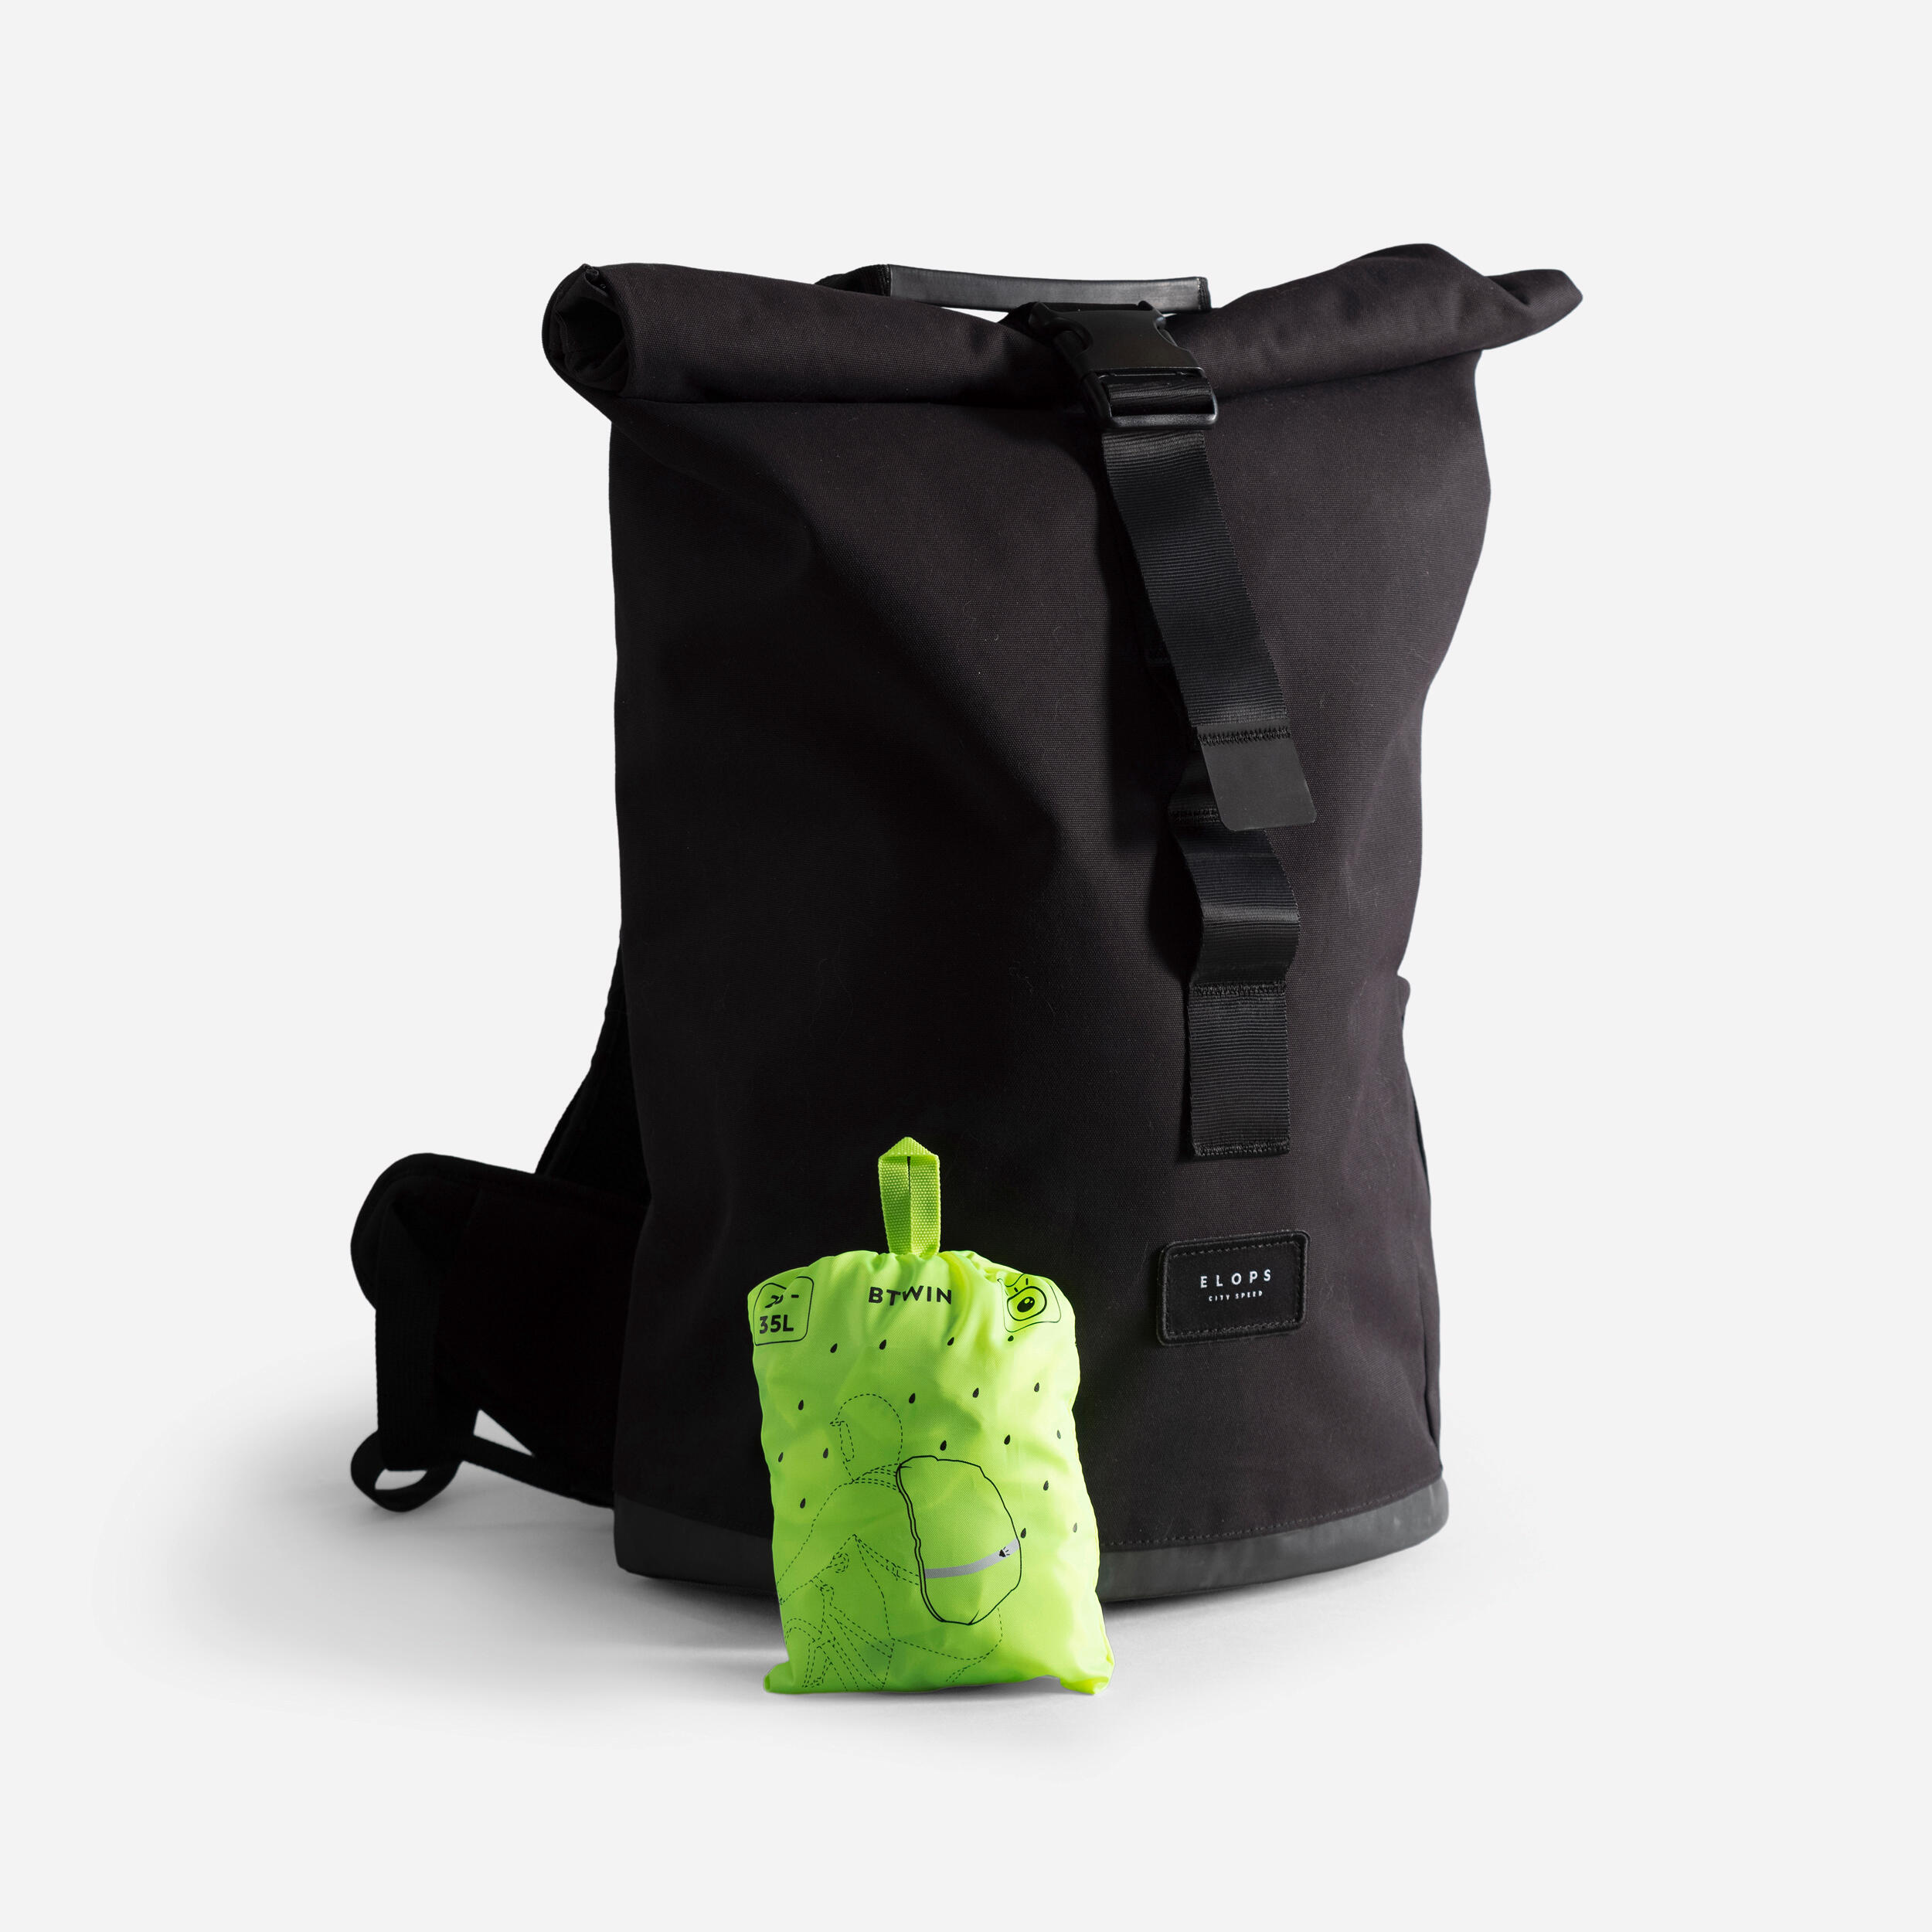 Waterproof High Visibility Bag Cover - Neon Yellow - BTWIN